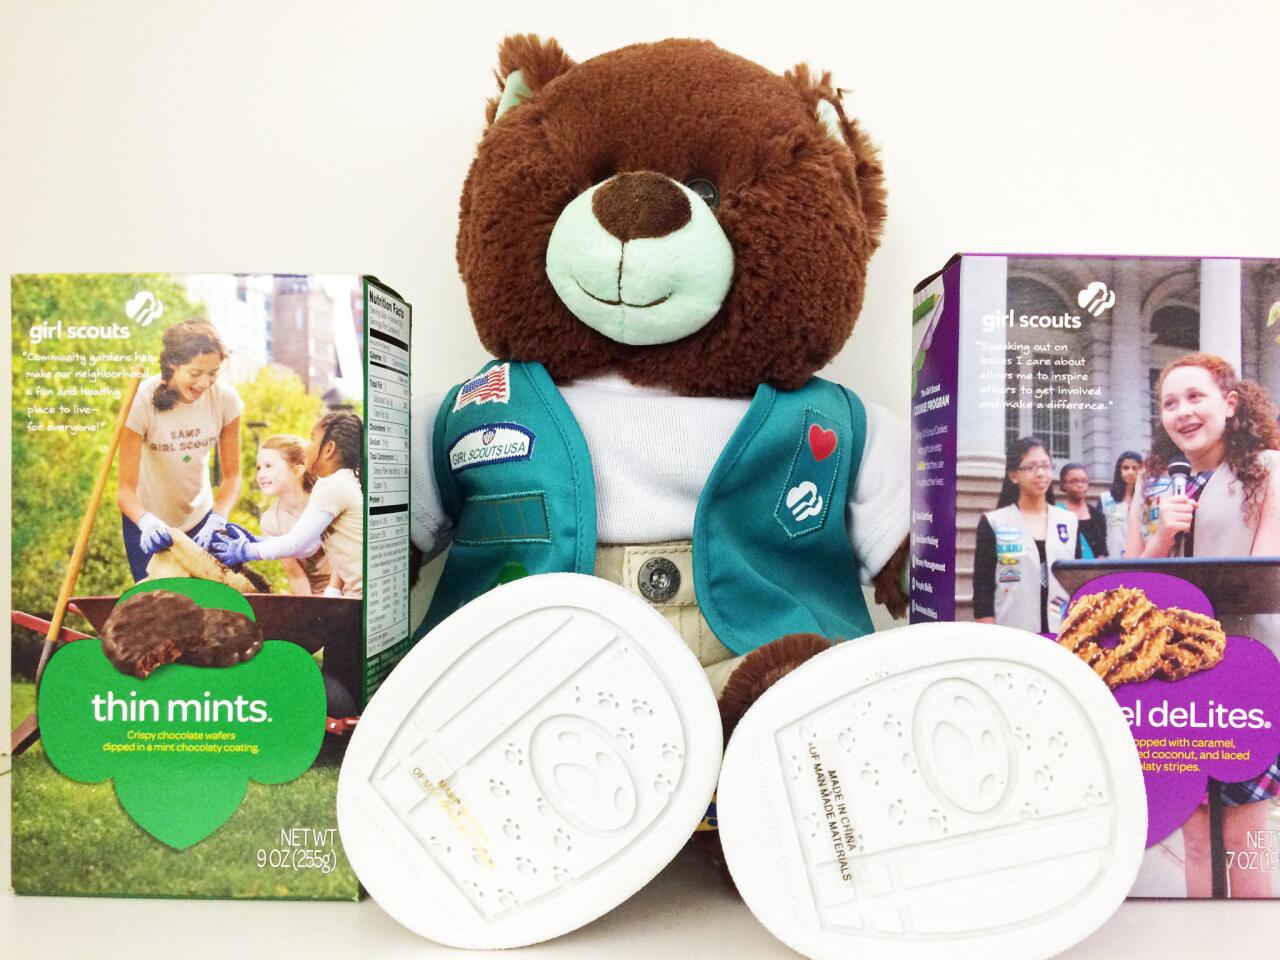 A Grimaldi's Pizzeria in El Segundo is making Girl Scout cookie cheesecake. Pictured is a box of Thin Mints, a box of Caramel deLites (a.k.a. Samoas) and a Girl Scouts bear.